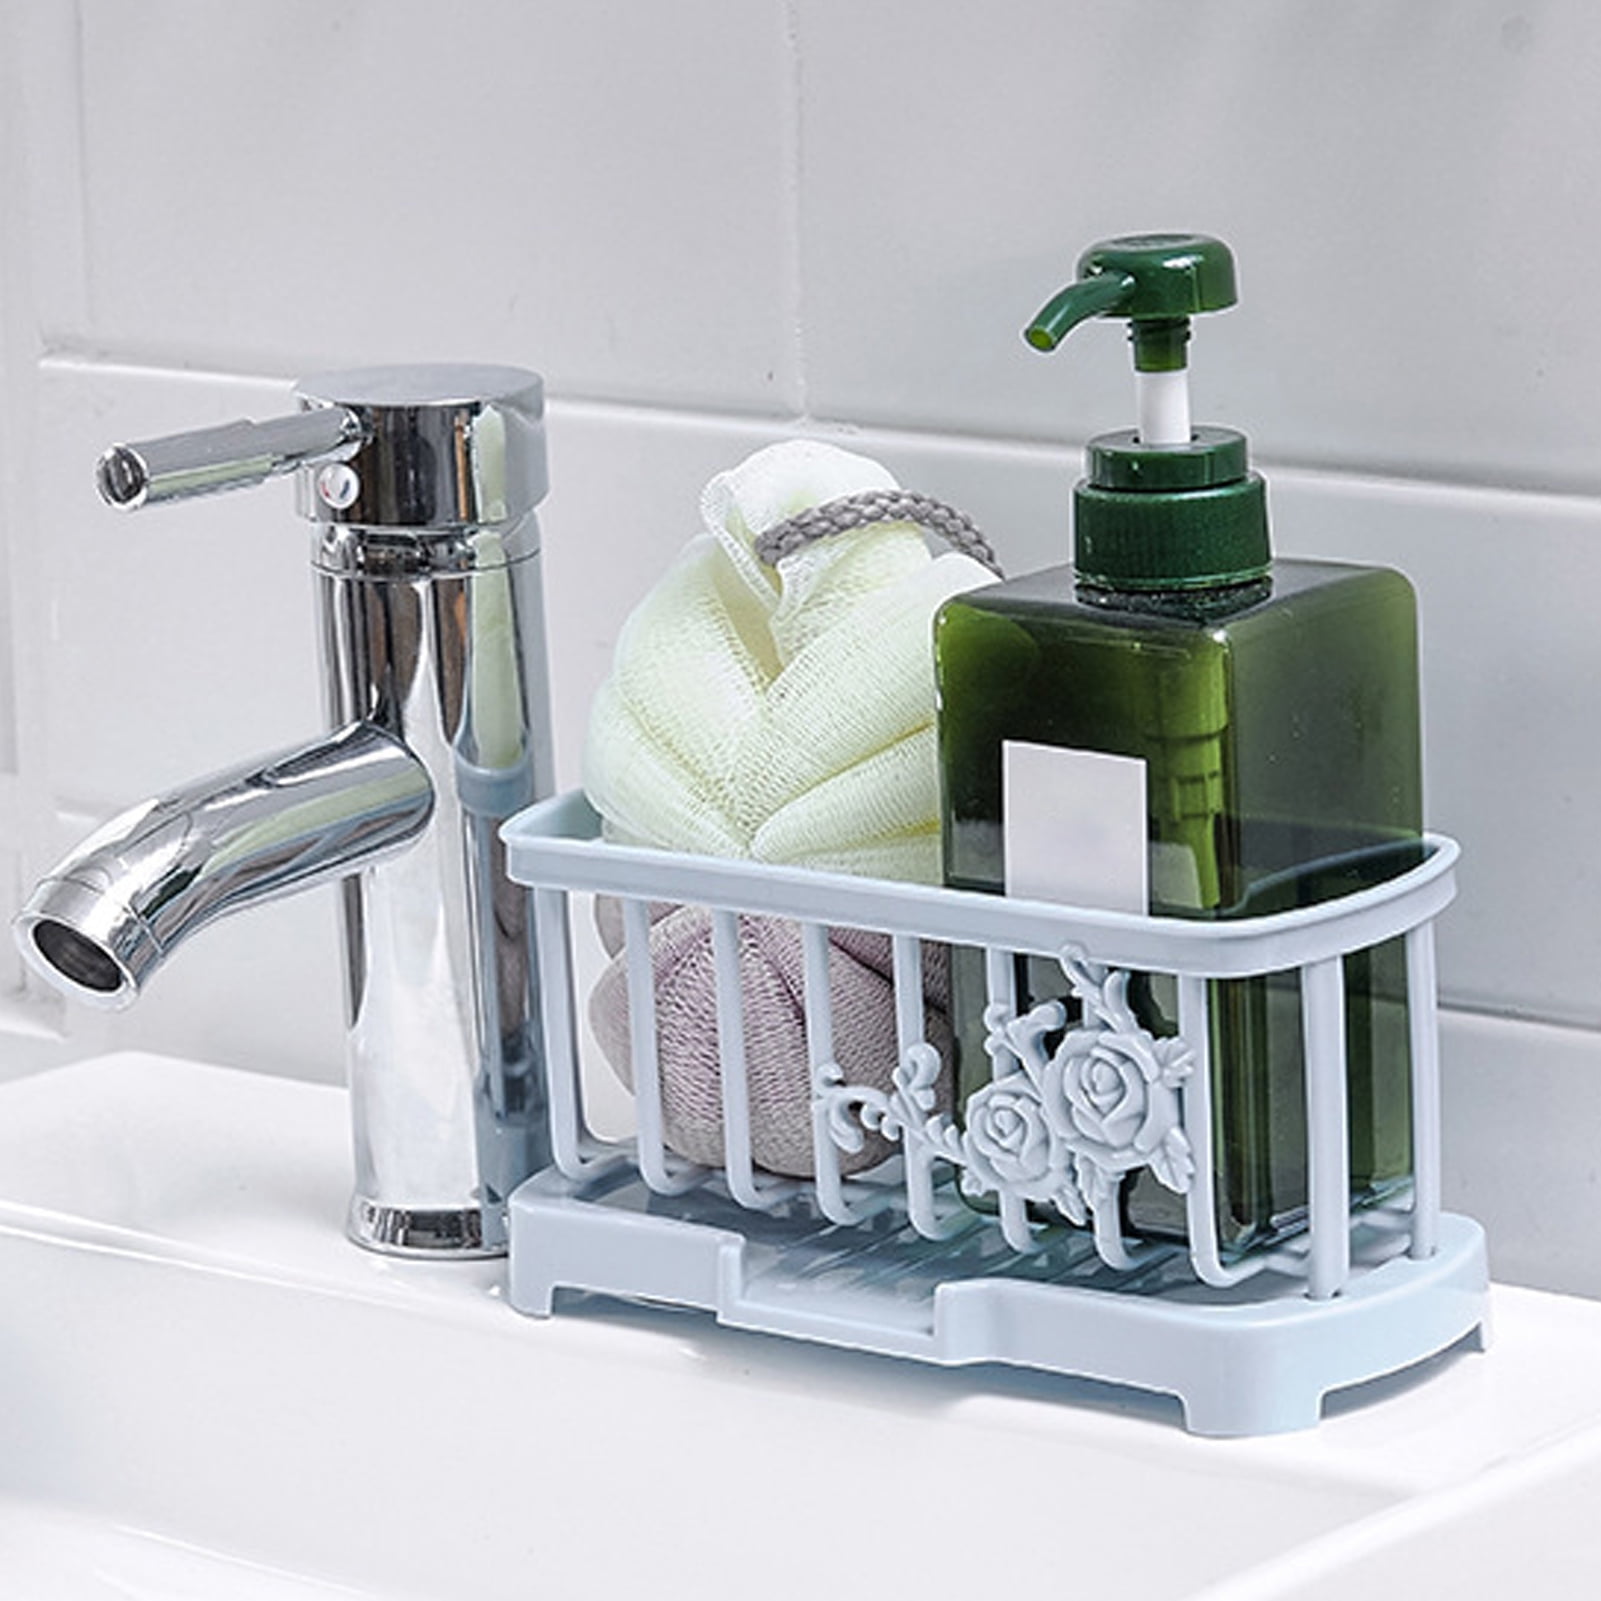 Cheers US Kitchen Sink Caddy Organizer, Sponge Holder with Drain Pan for Sponges, Soap, Kitchen, Bathroom, Size: One size, Green